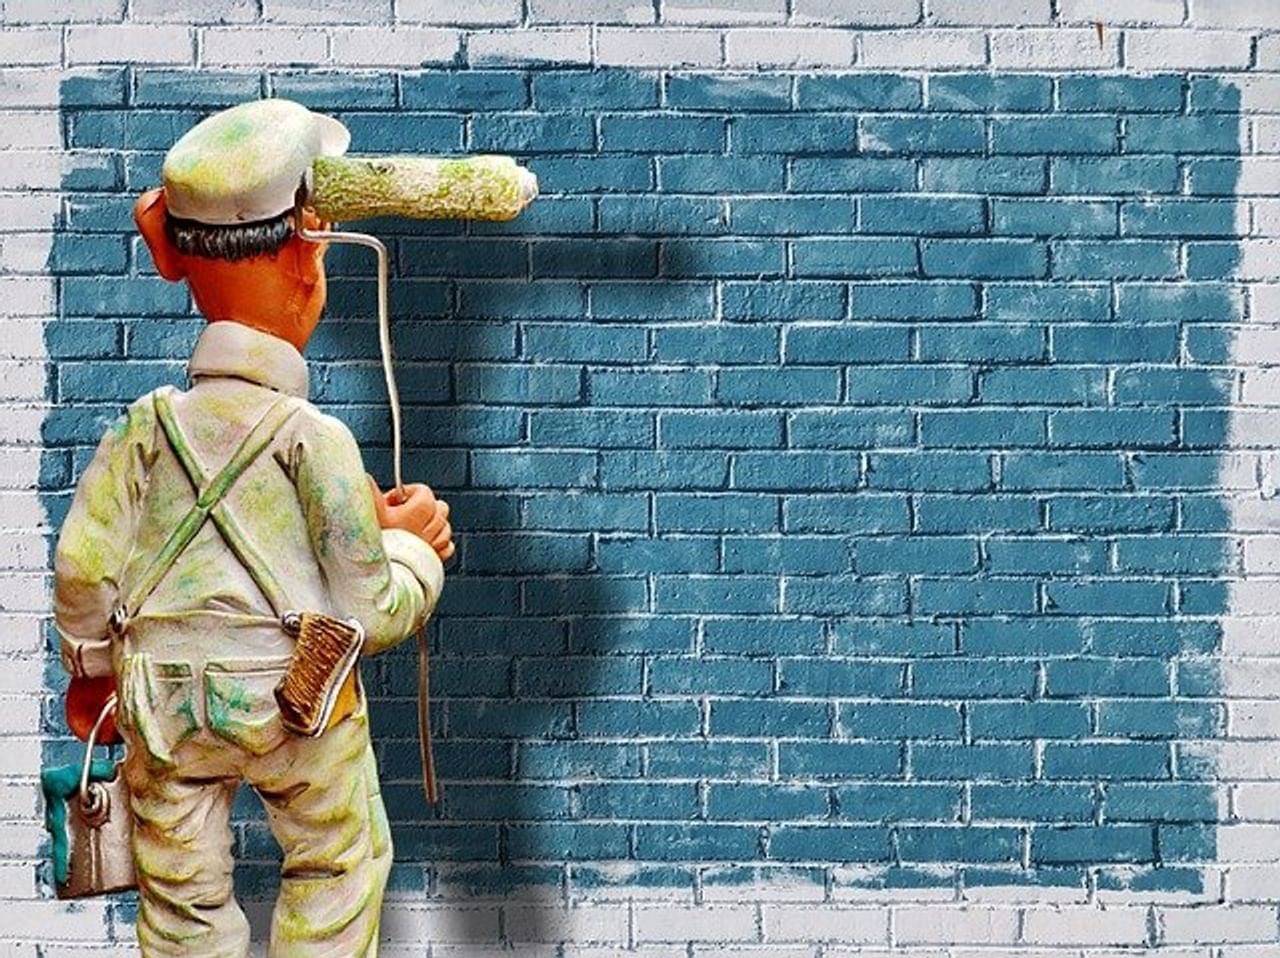 paint industry to get benefitted from economic recovery, should you invest in it?